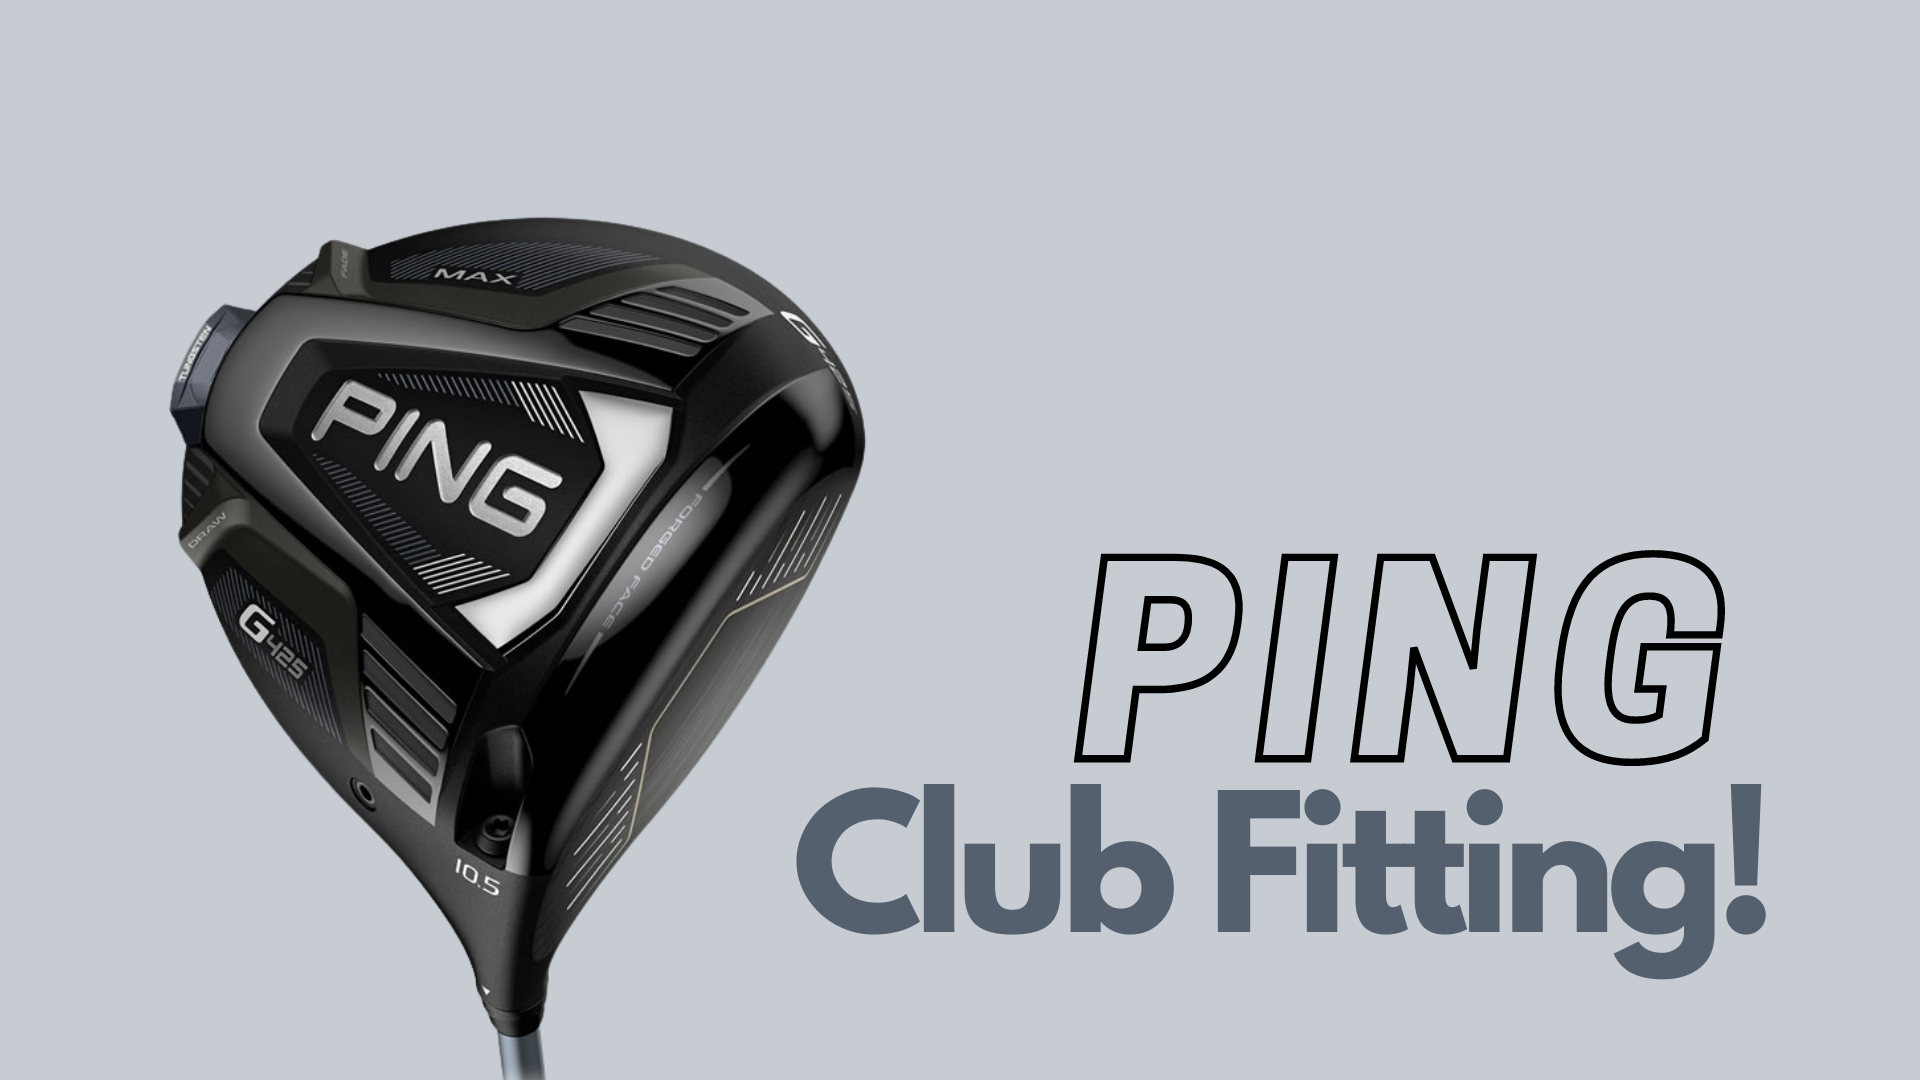 PING Fitting